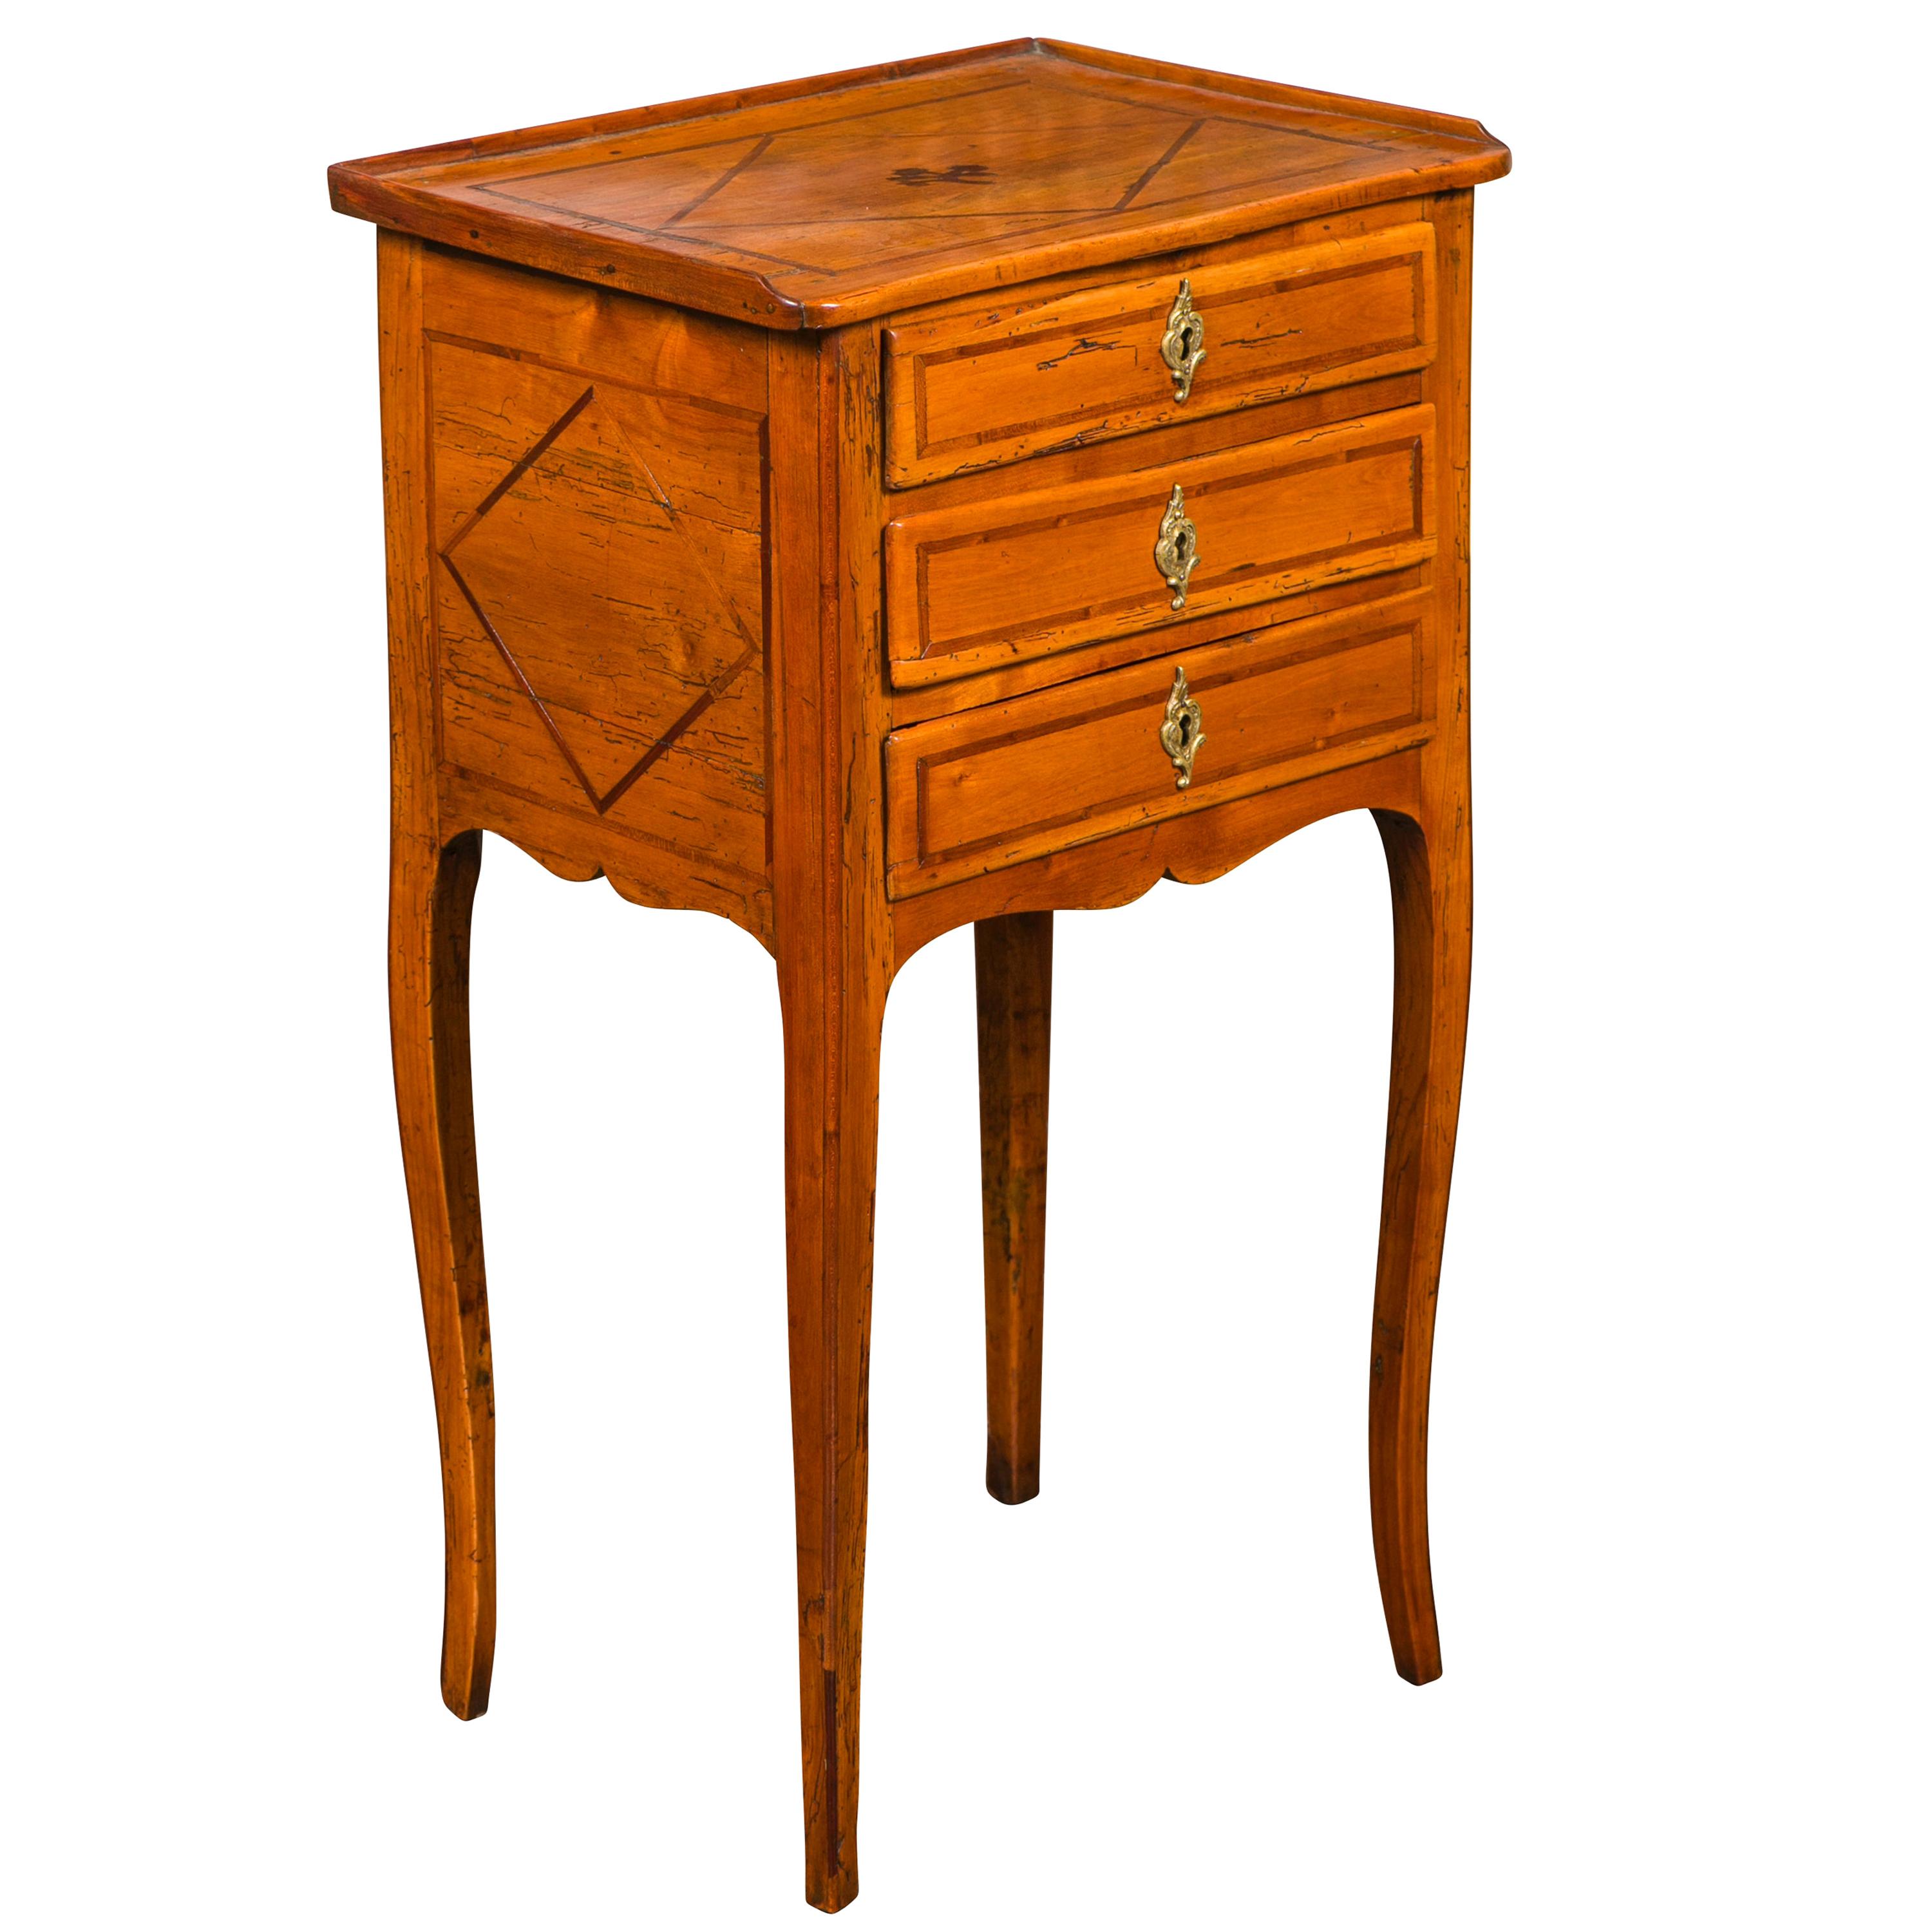 French Louis-Philippe Period 1840s Walnut Bedside Table with Geometric Banding